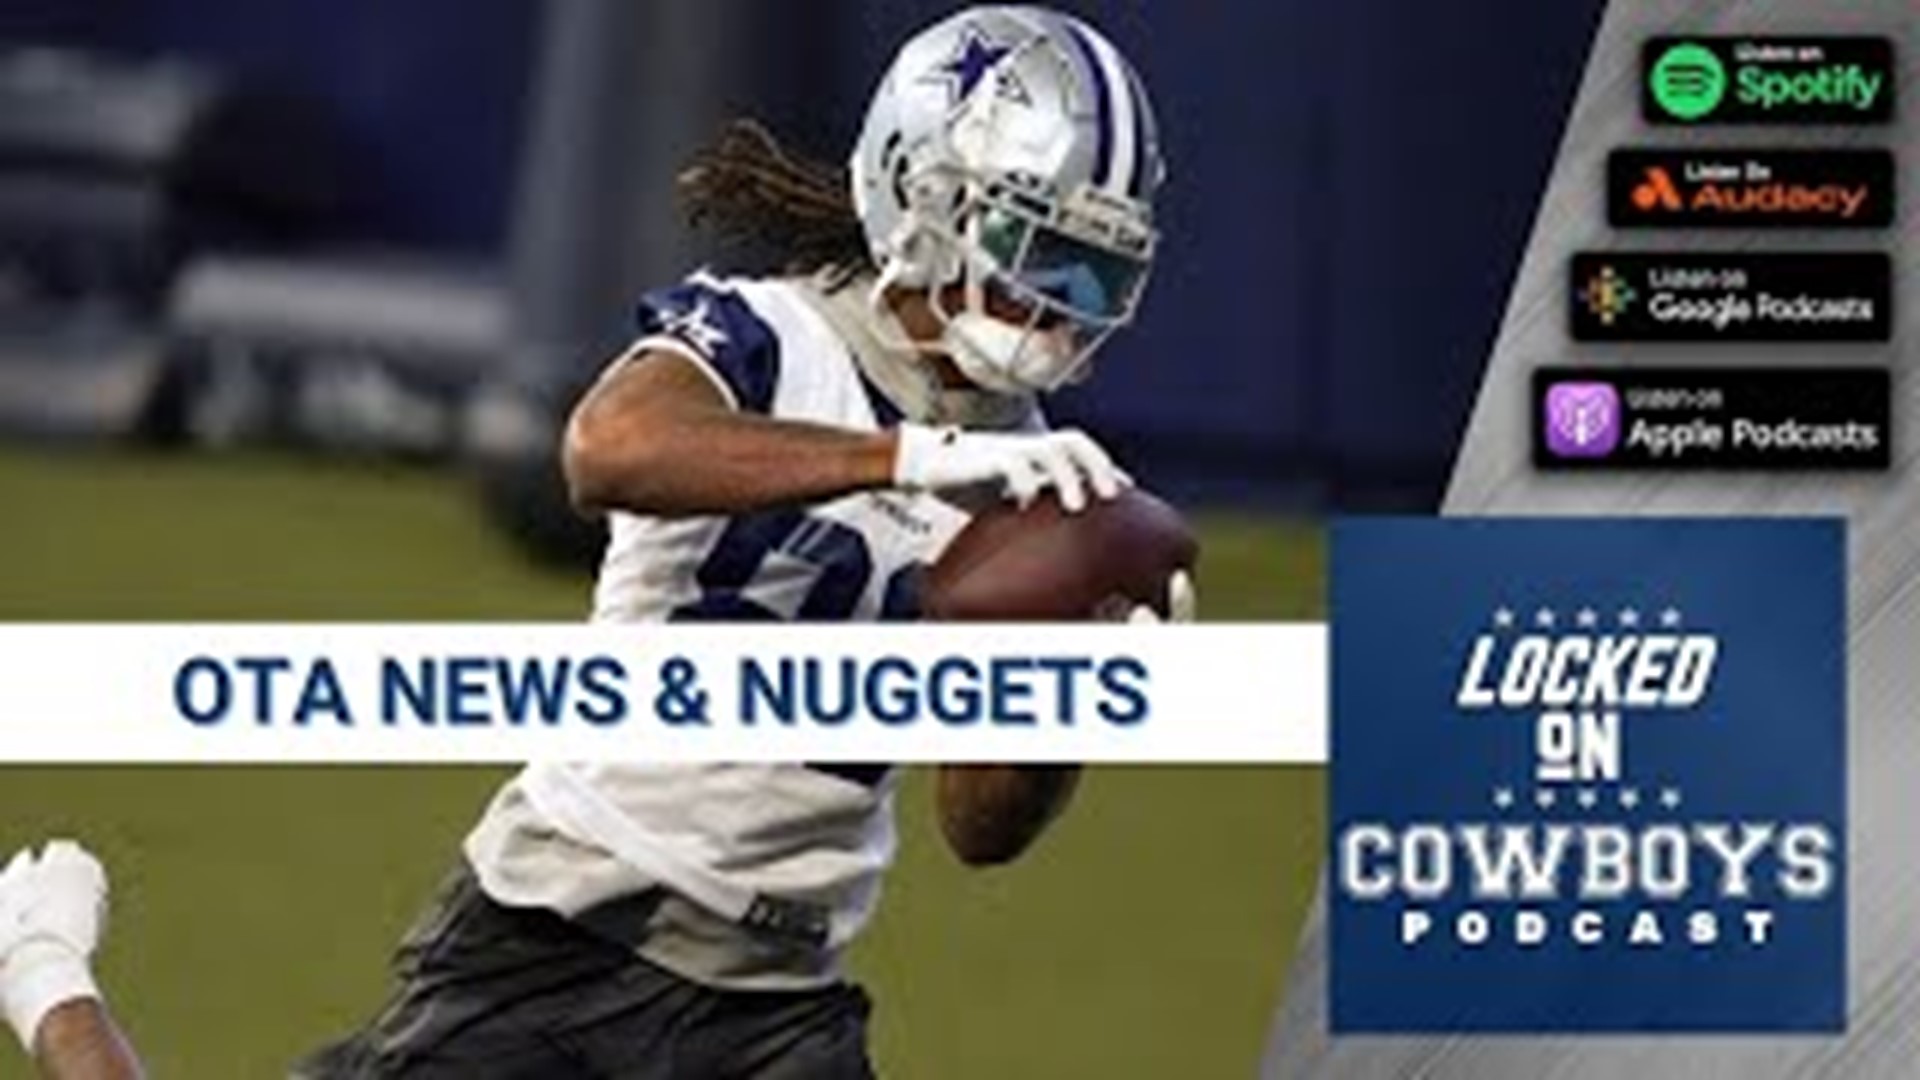 Marcus Mosher and Landon McCool of Locked On Cowboys discuss all of the latest news, nuggets and rumors from OTAs for the Dallas Cowboys.